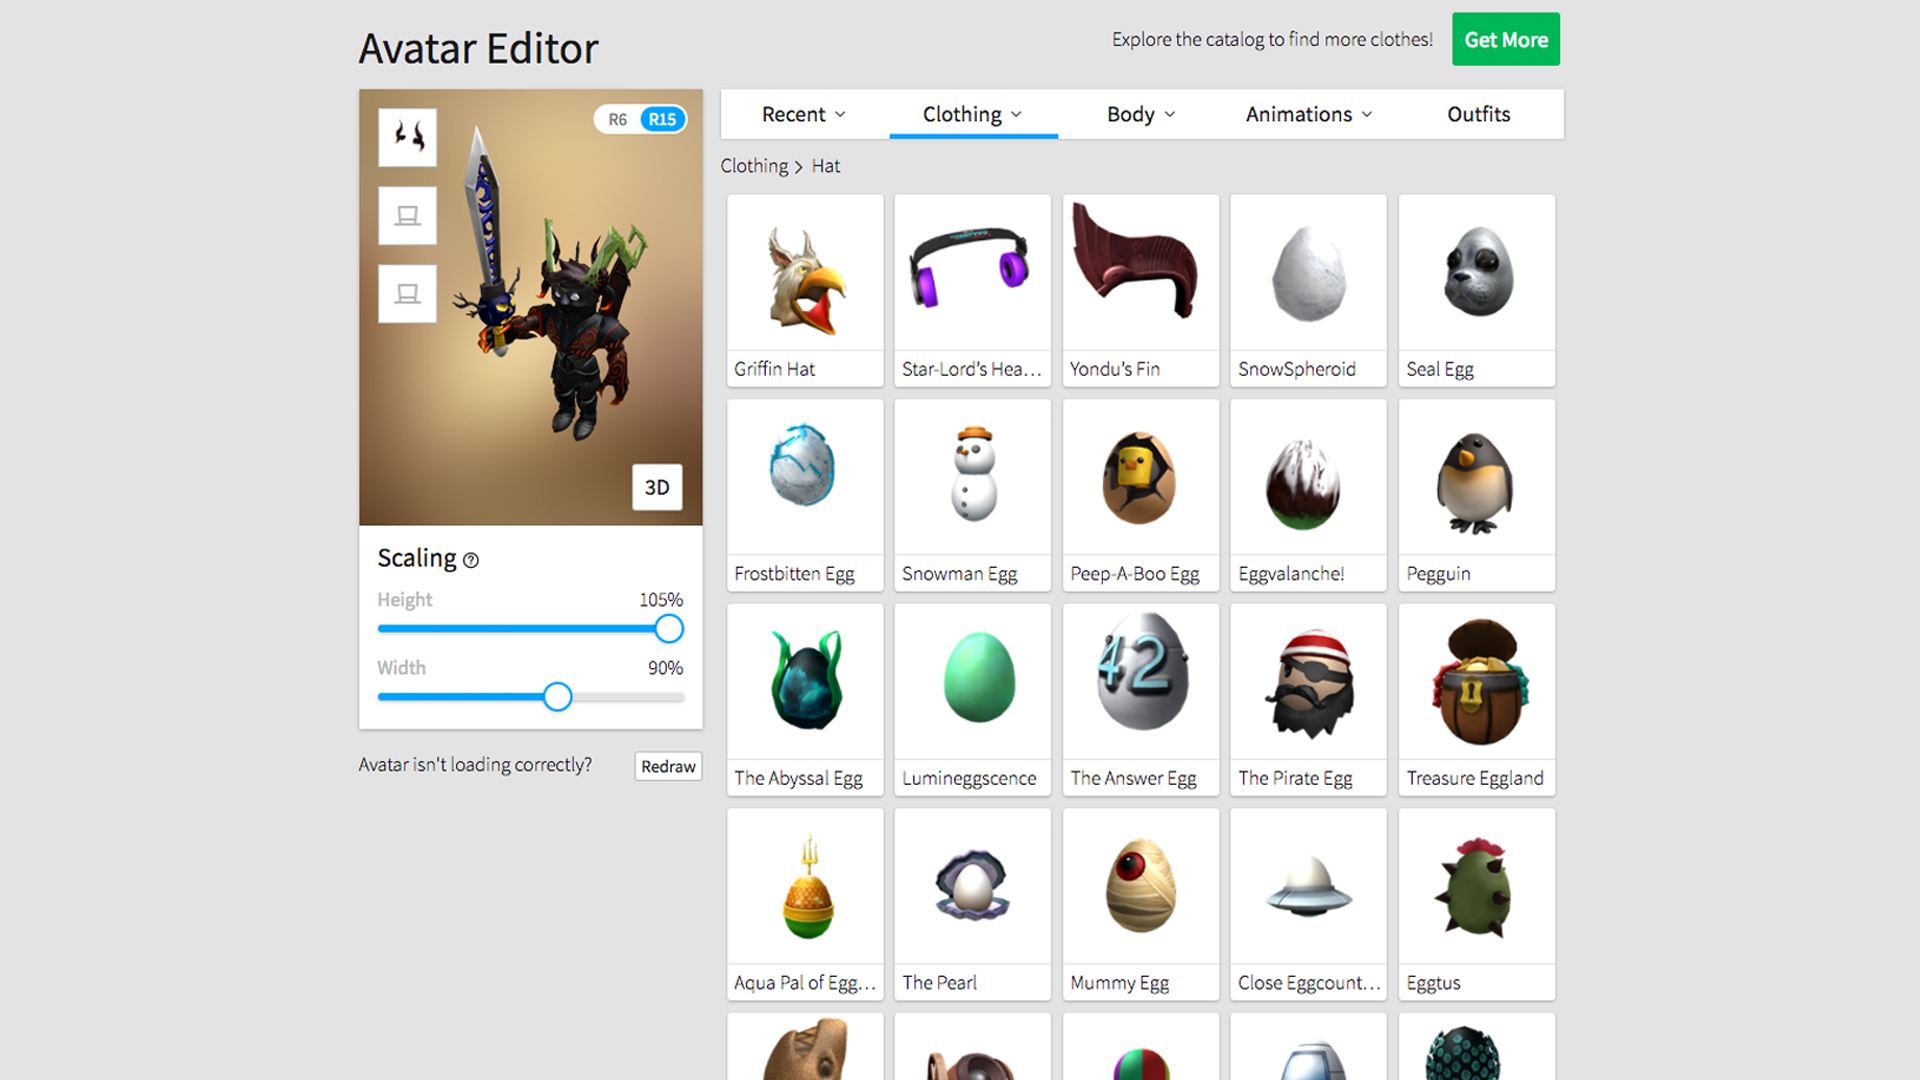 Update New Avatar Editor Web Tablets Previewing Animations